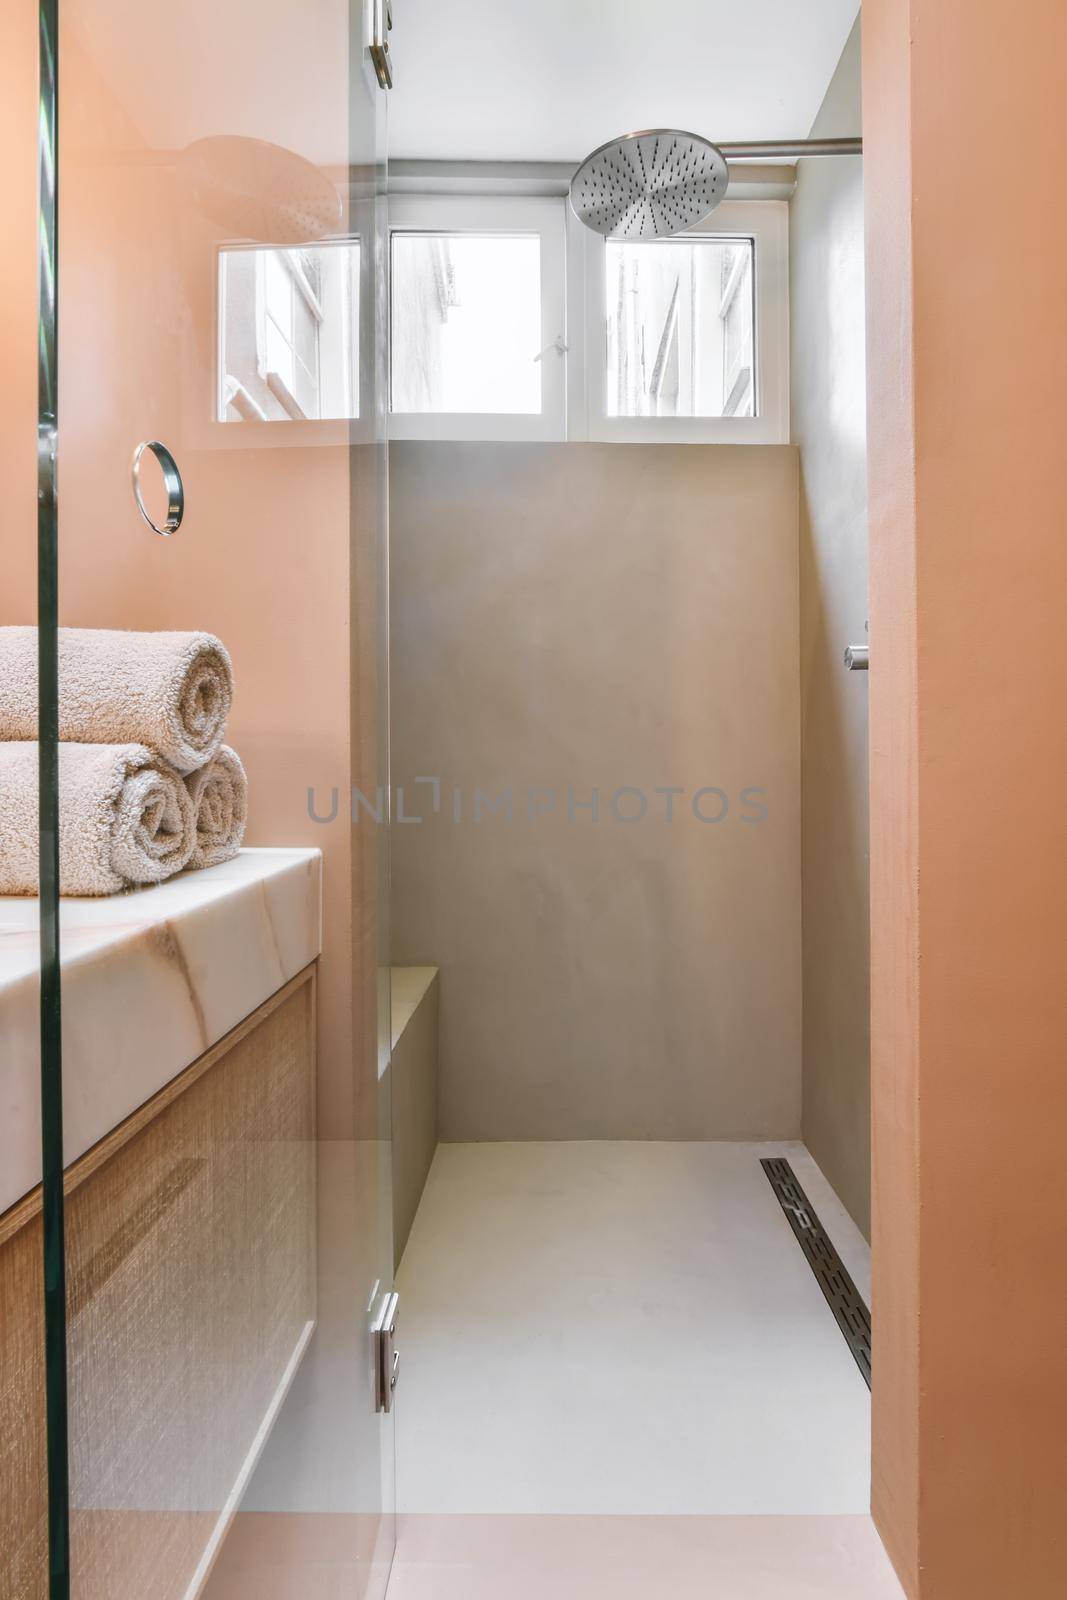 Luxurious bathroom with peach walls and glass shower enclosure